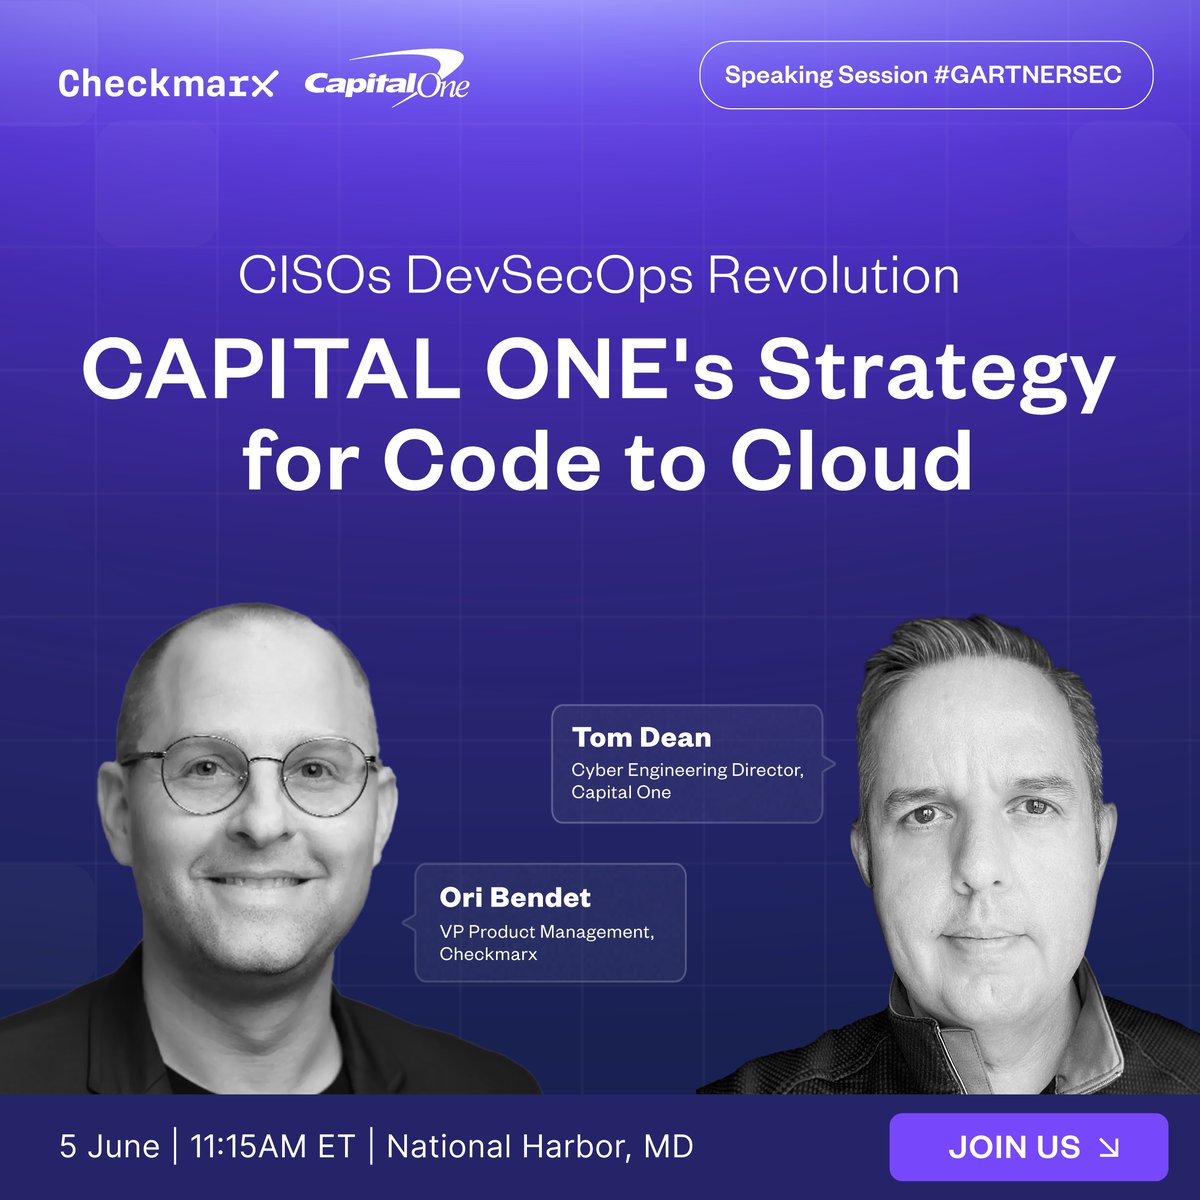 👨‍💻☁️ #CodeToCloud approach is changing #DevSecOps – for the better!
Join @CapitalOne’s Tom Dean & our own @bendet_ori at #GartnerSEC to learn how this approach can combat alert fatigue & significantly improve your ability to secure your SDLC. More details: hubs.ly/Q02yMK9s0